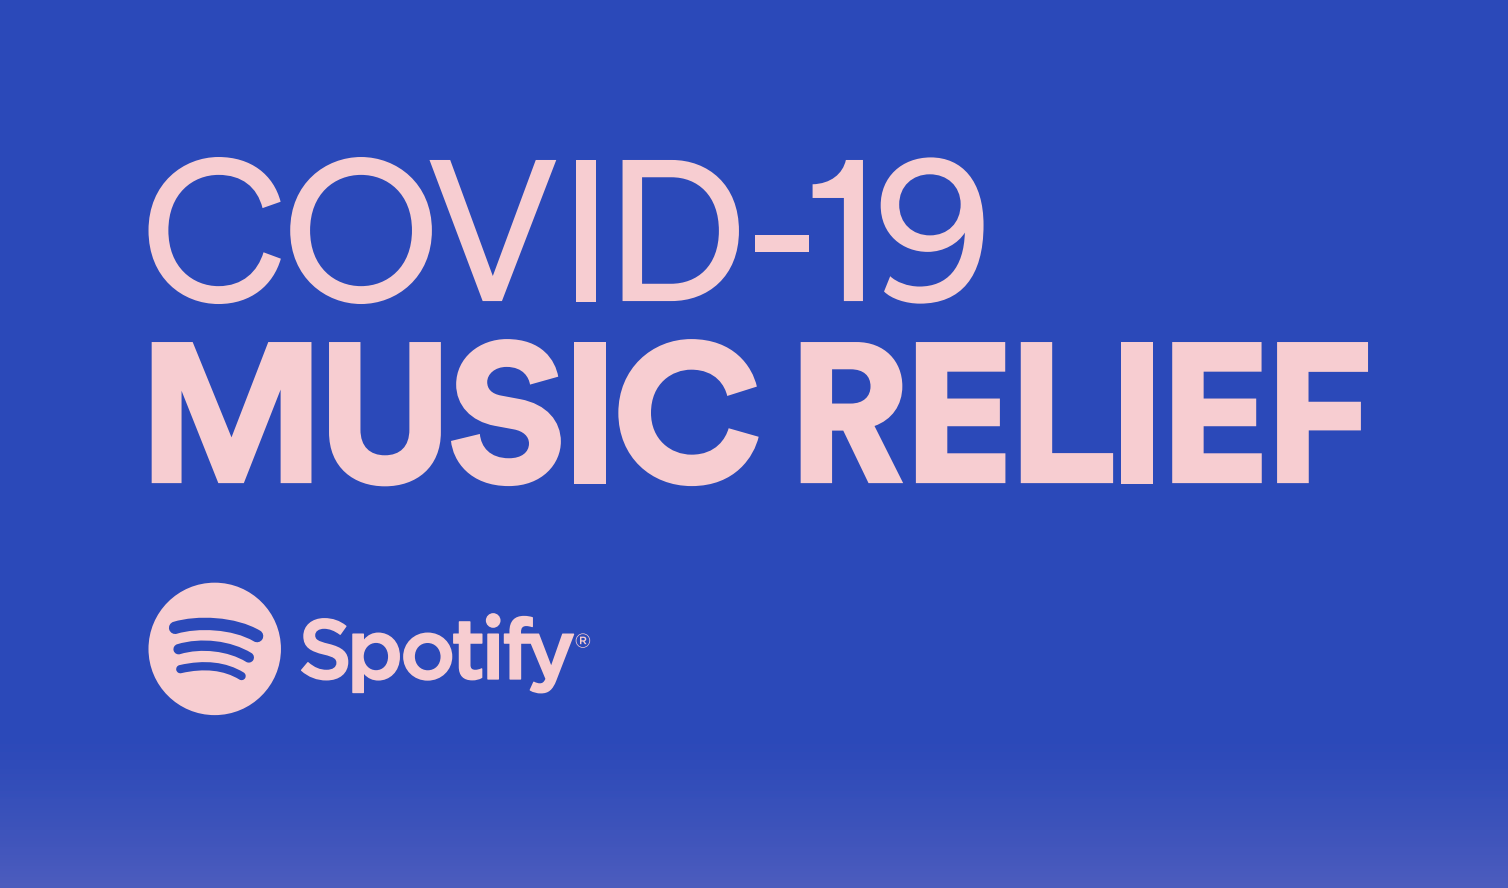 Here’s what Spotify are doing to help musicians during COVID-19 and how you can get involved